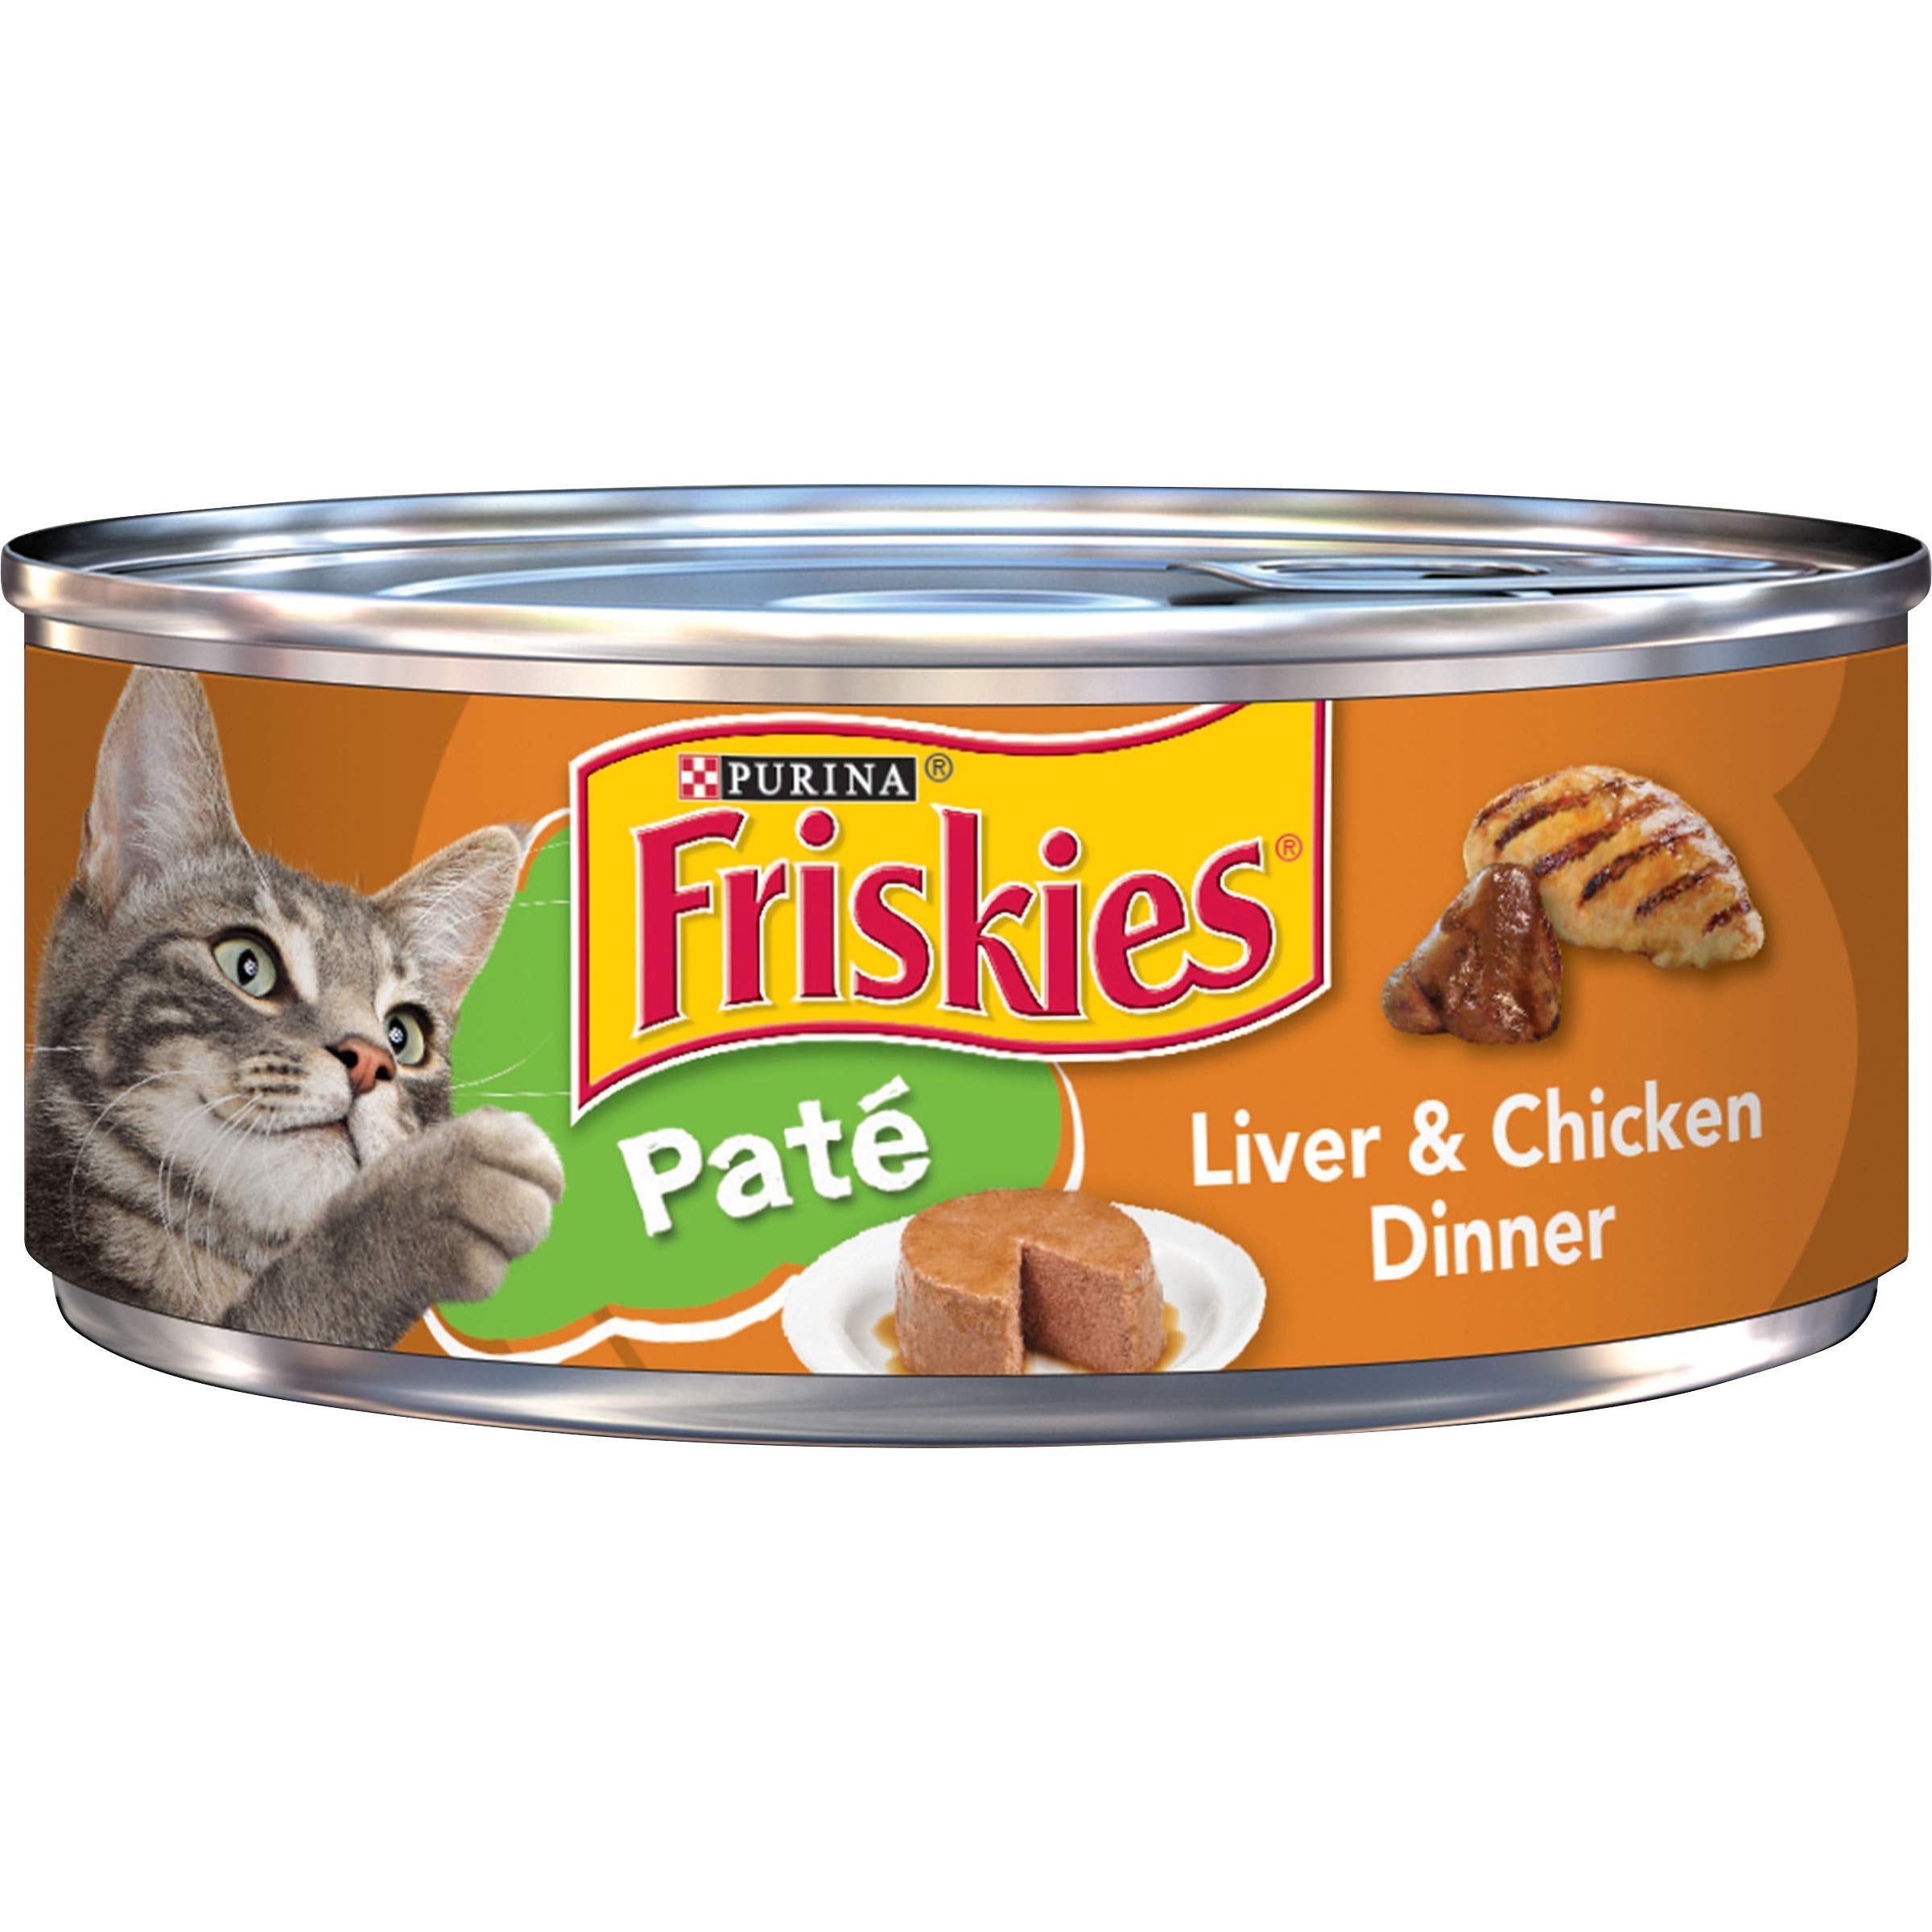 Purina Friskies Surfin' and Turfin' Turkey Salmon Chicken and Liver Pate Canned Cat Food - Variety Pack - 5.5 Oz - Case of 32  